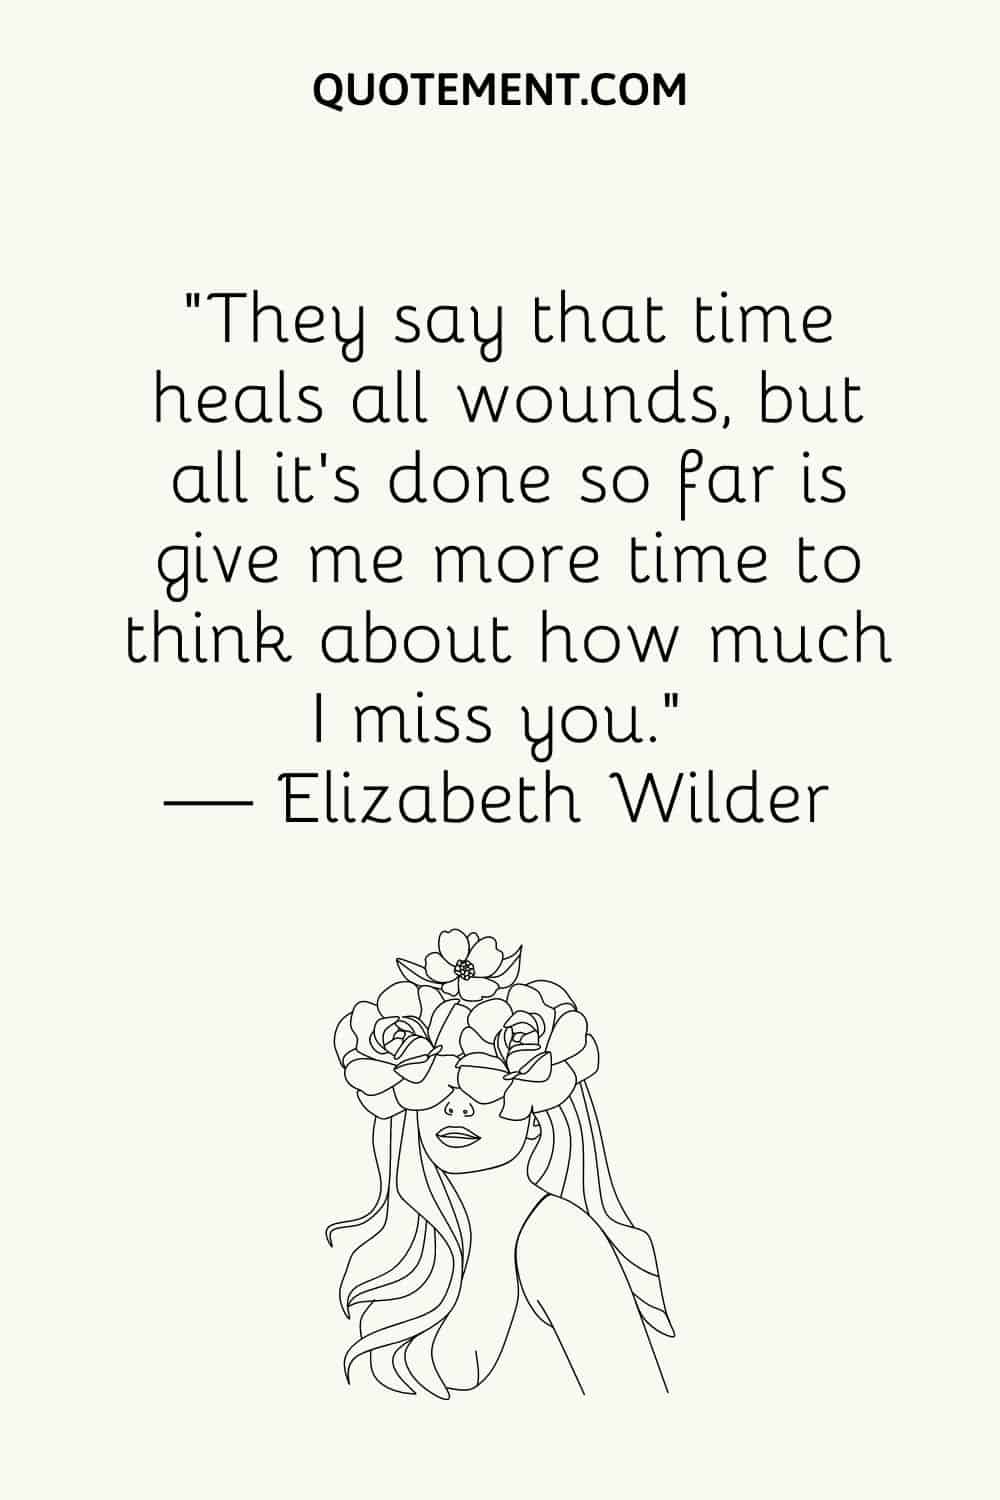 “They say that time heals all wounds, but all it’s done so far is give me more time to think about how much I miss you.” — Elizabeth Wilder